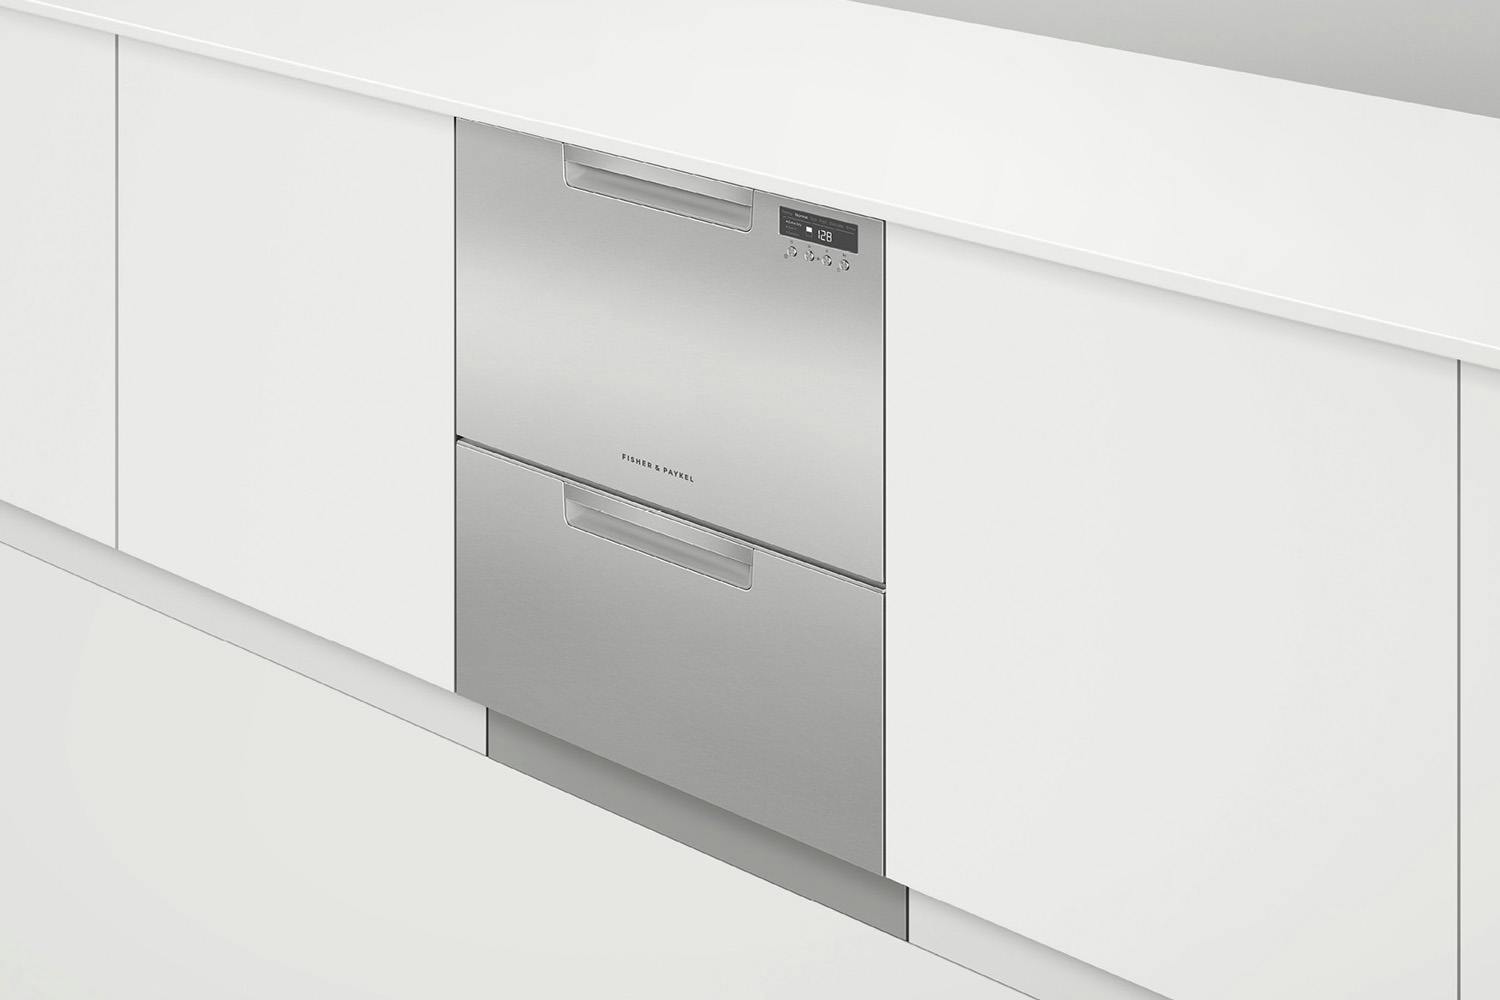 DD24DCTX7  Fisher Paykel Tall Tub Double Dishwasher Drawer w/Recessed  Handle - Stainless Steel